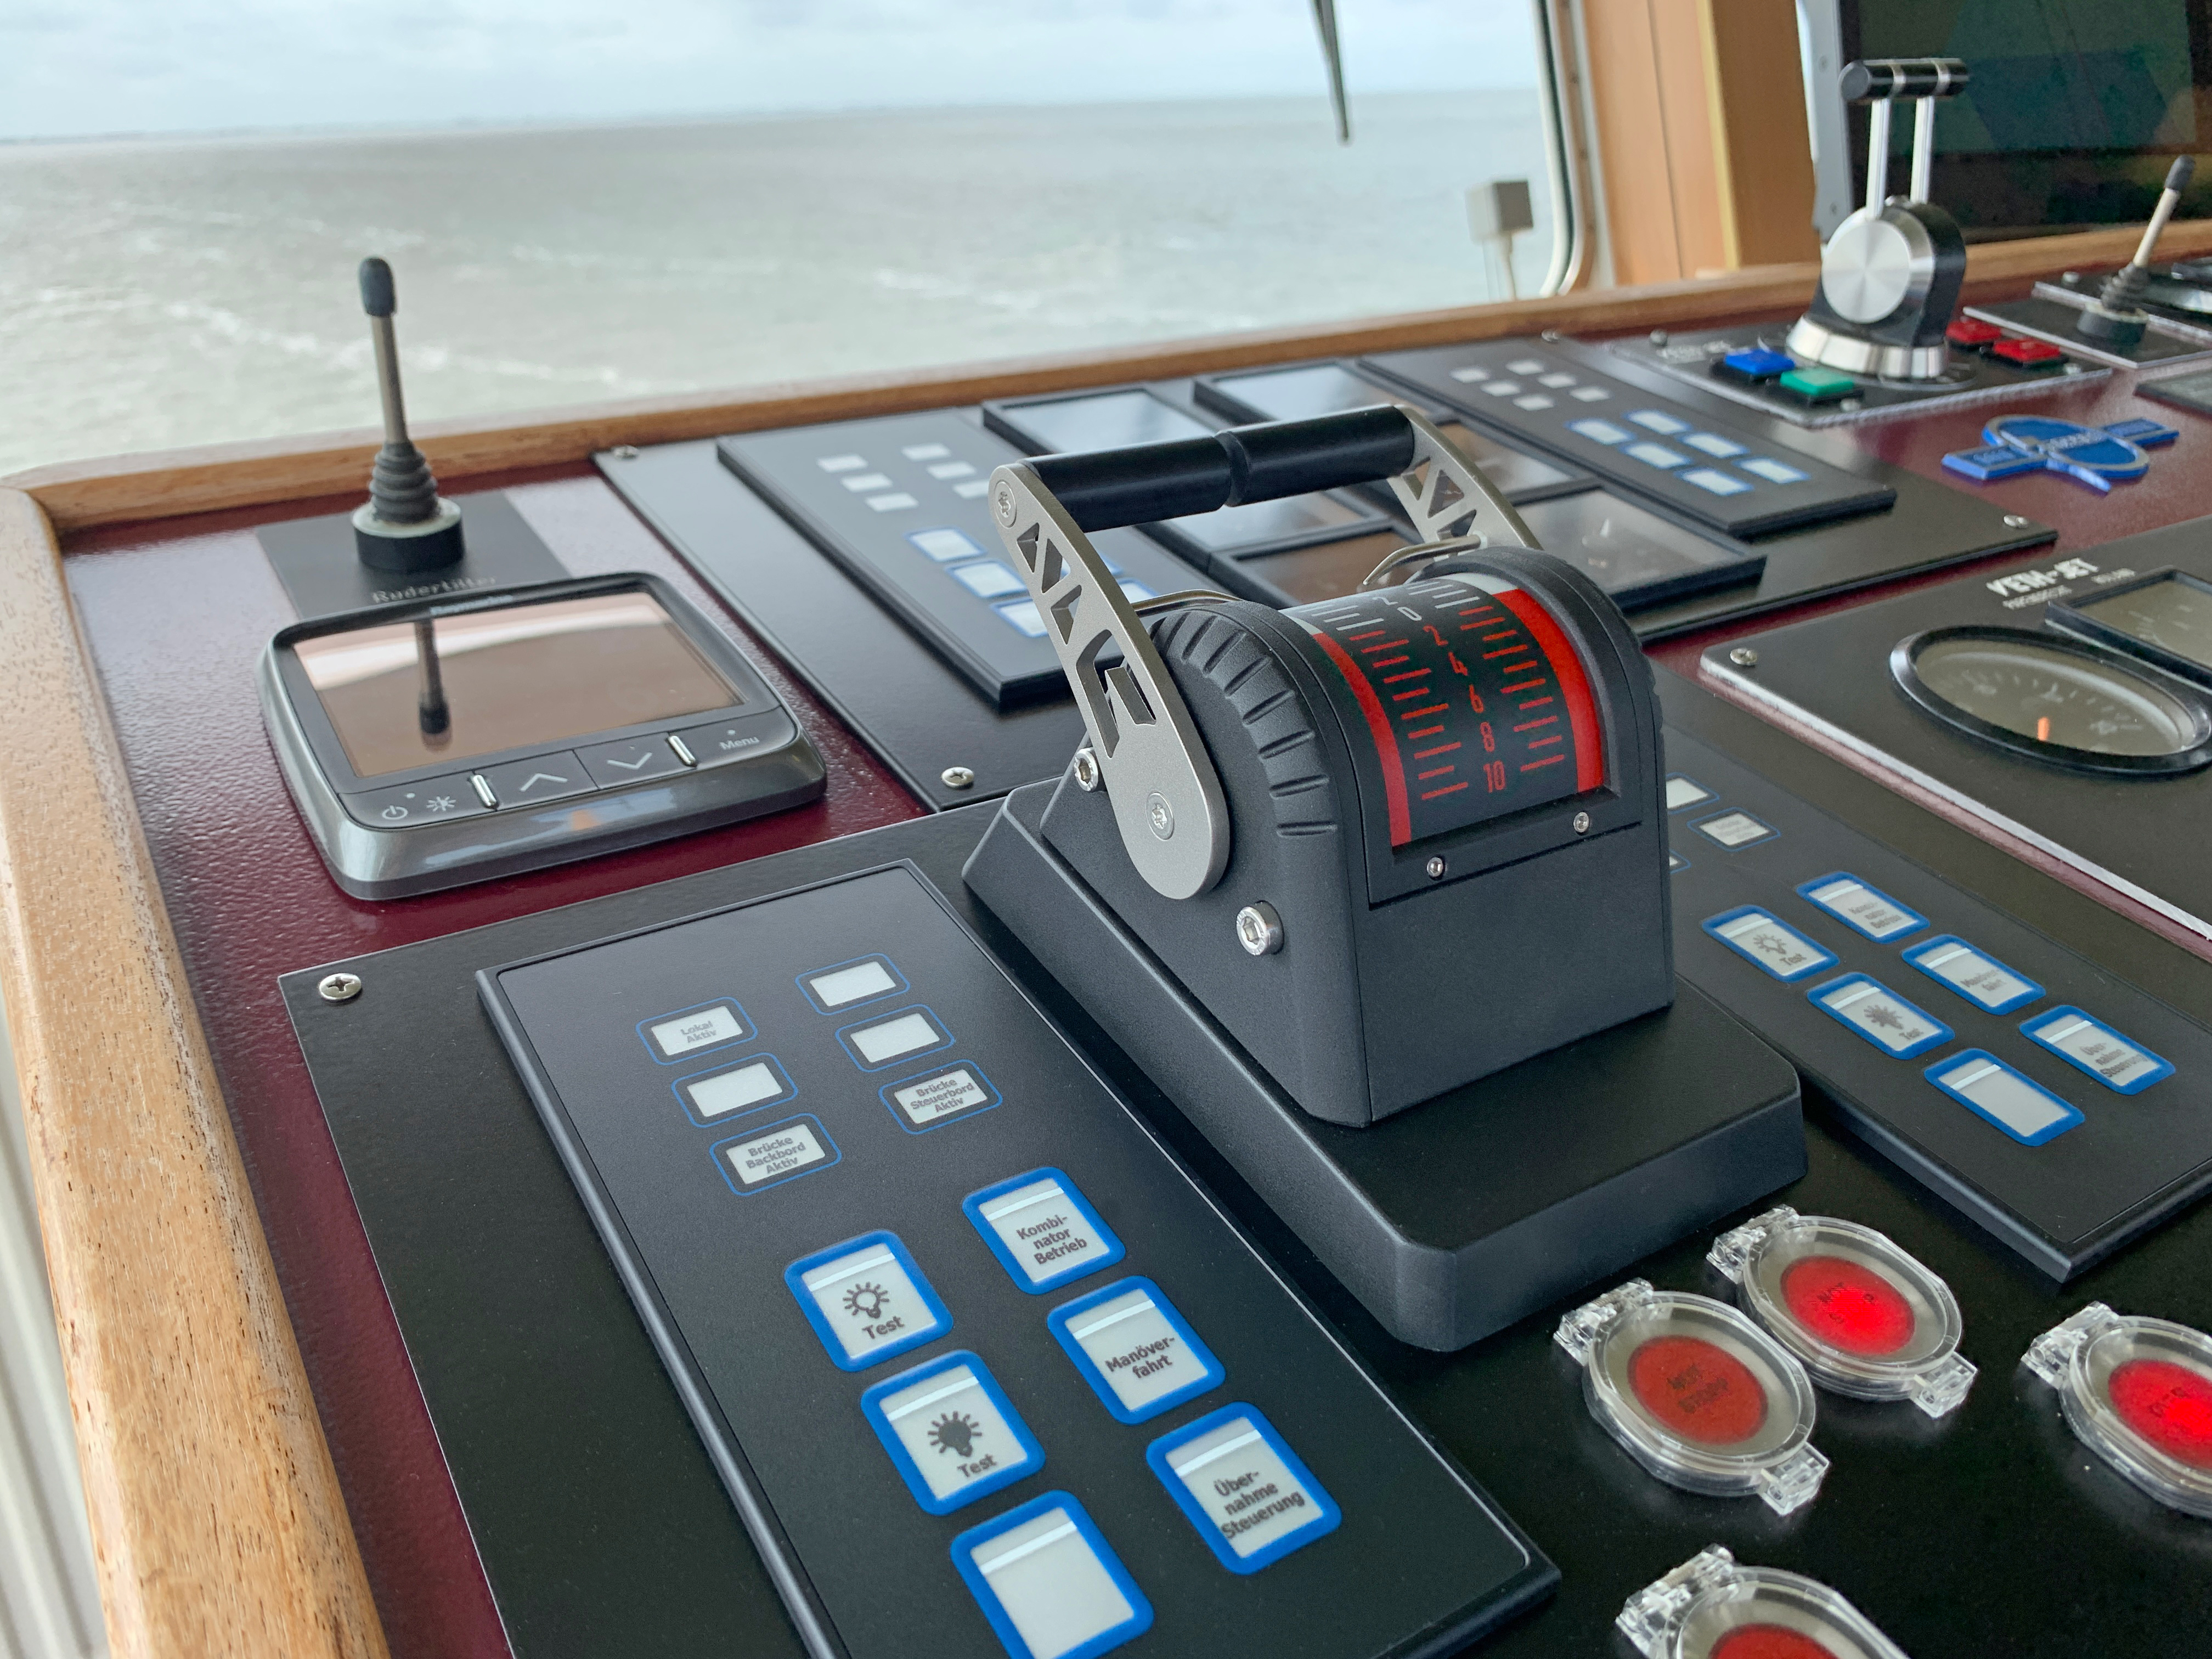 The image shows the Bridge panel of the Frisia 2 passenger ship with a Noris control lever panel